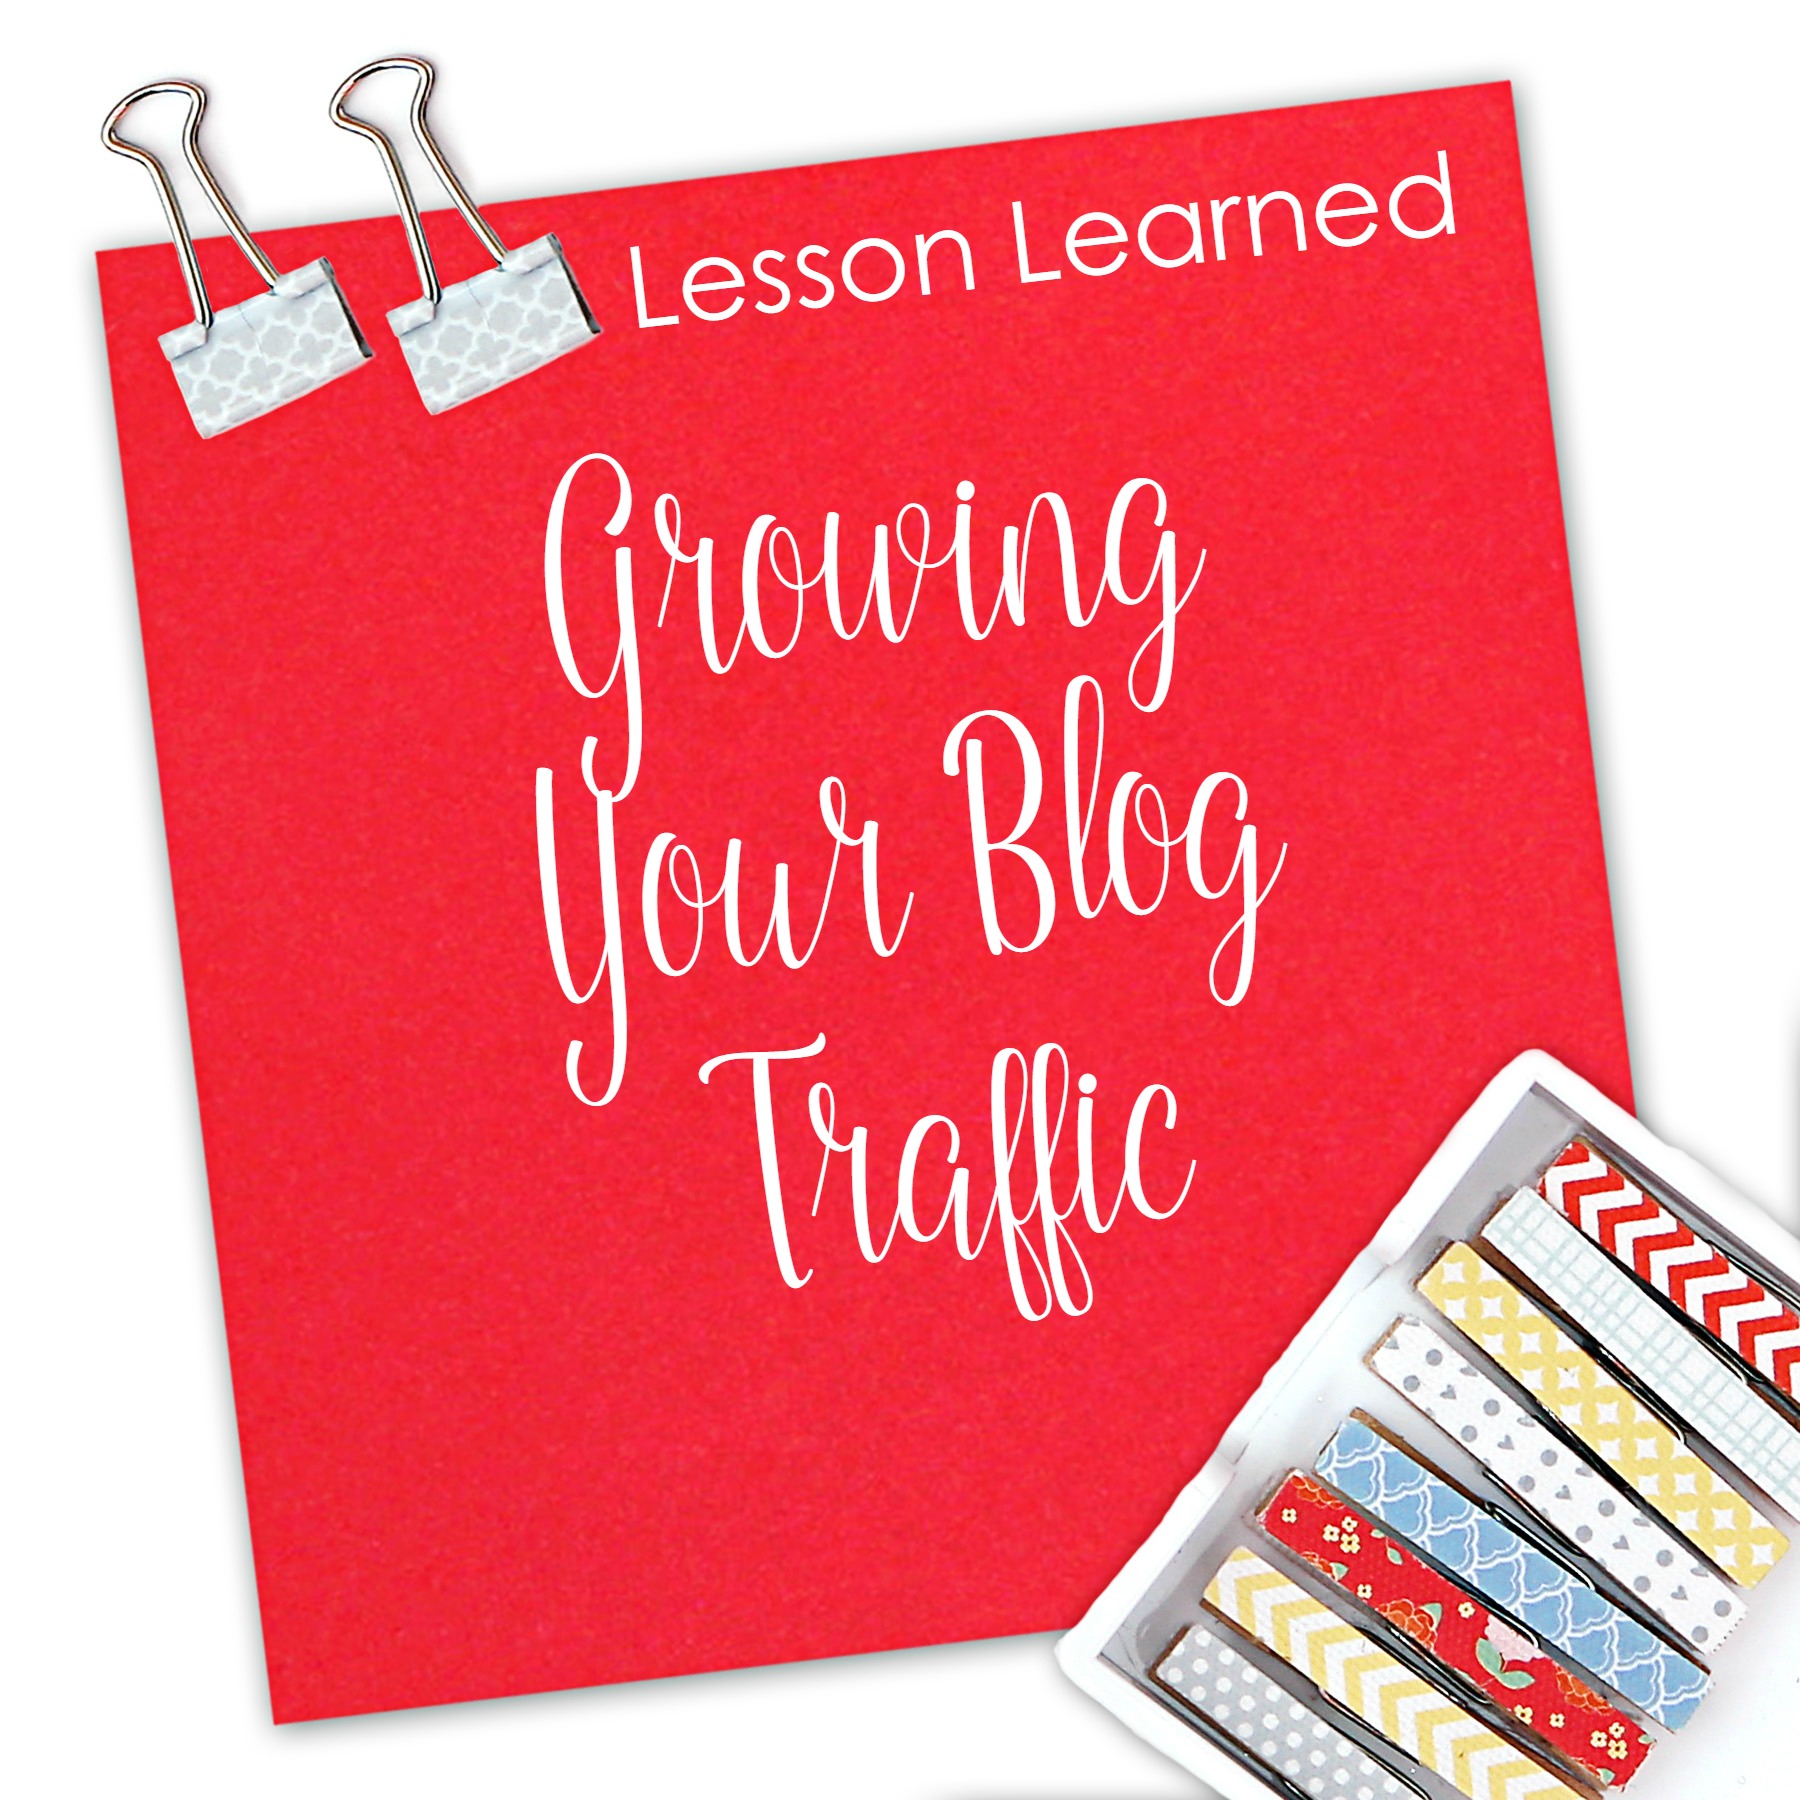 Selecting the right strategies for my blog from this ebook doubled my blog traffic in one month. CRAZY!!!